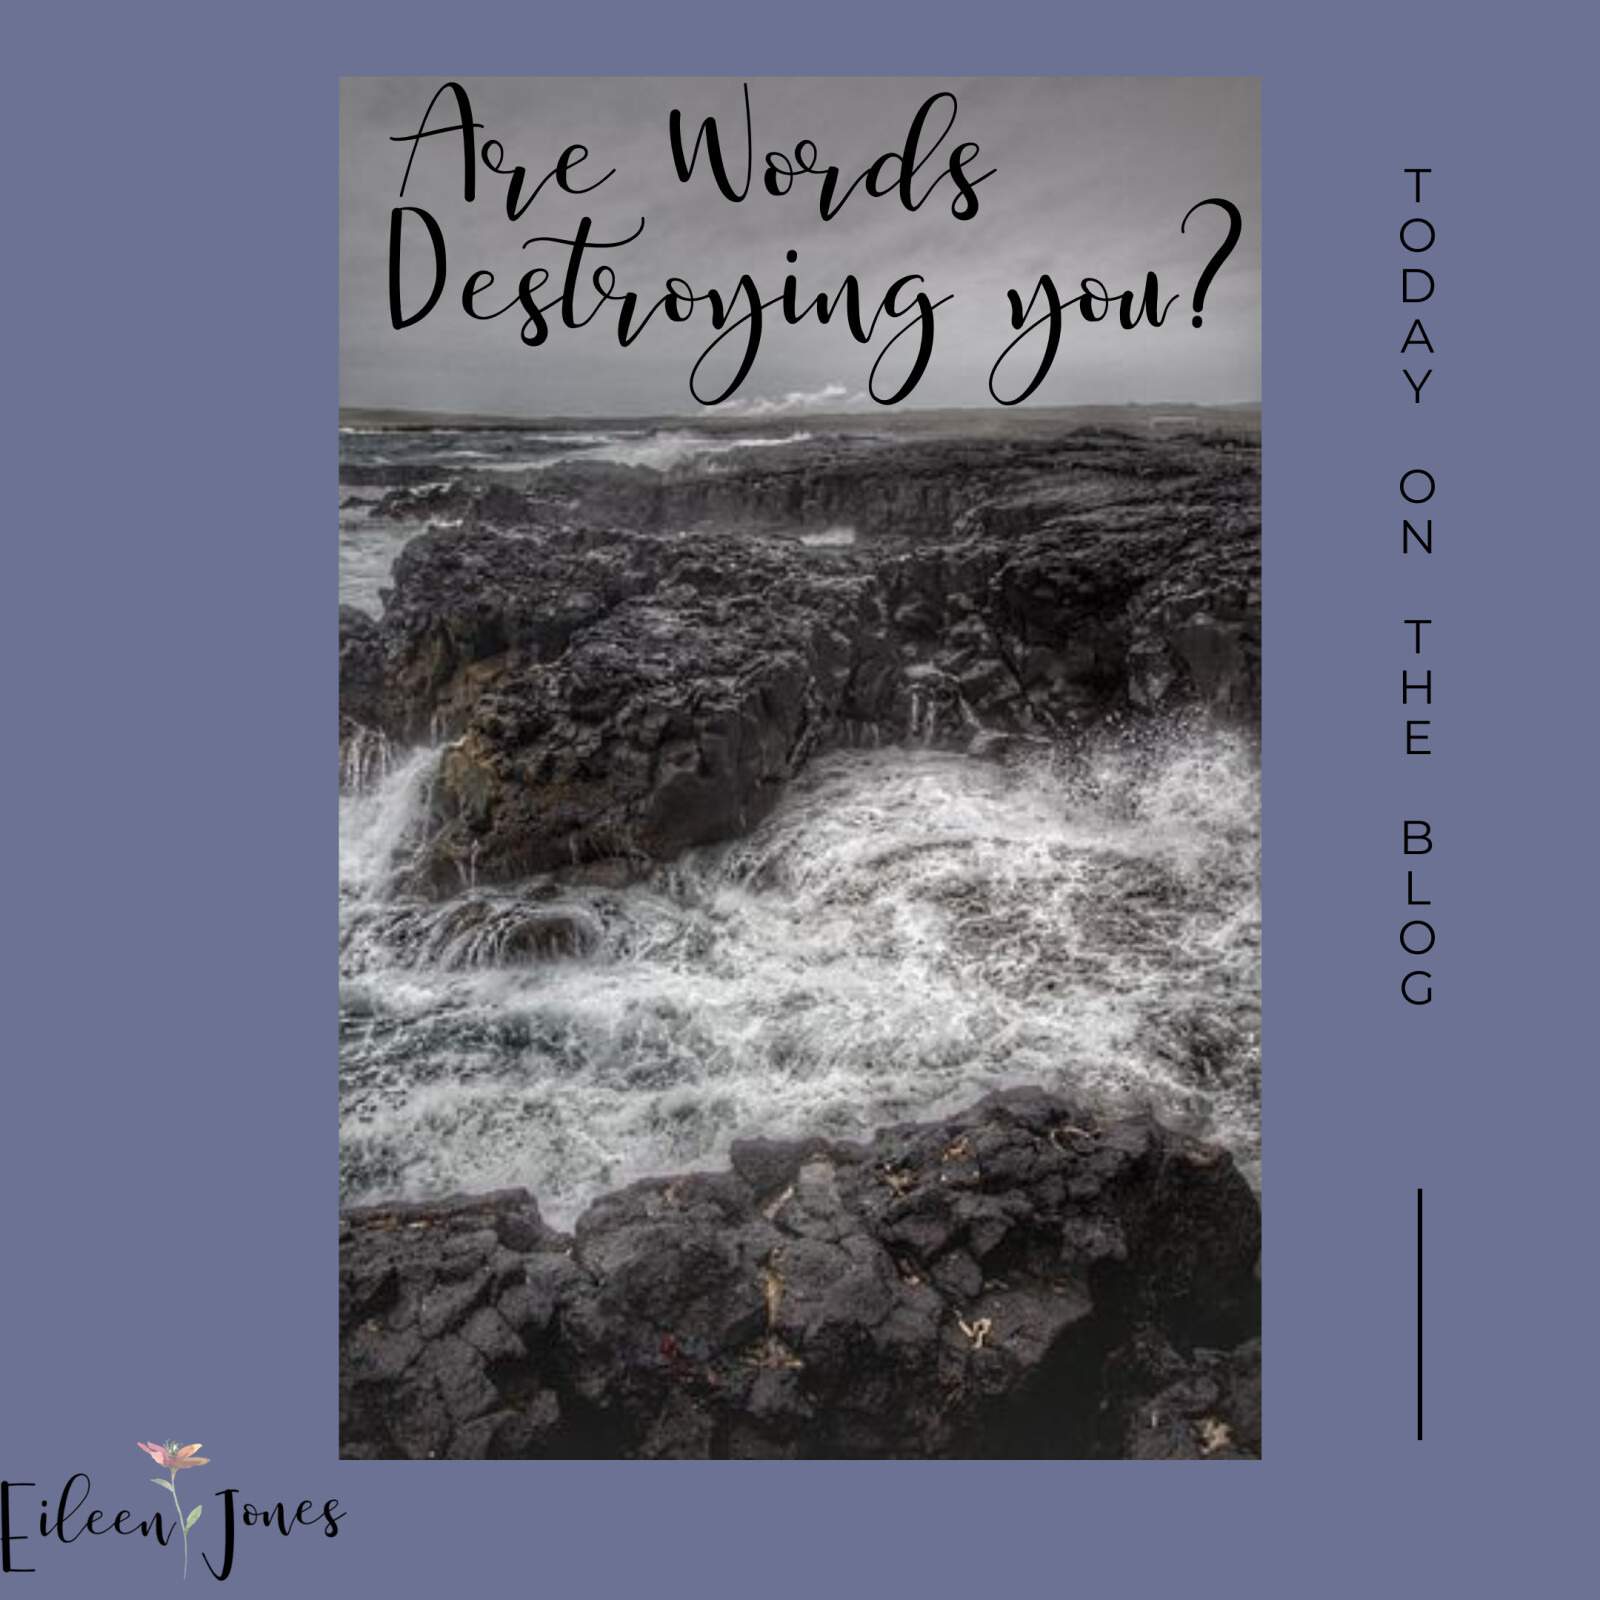 Are WORDS destroying you?